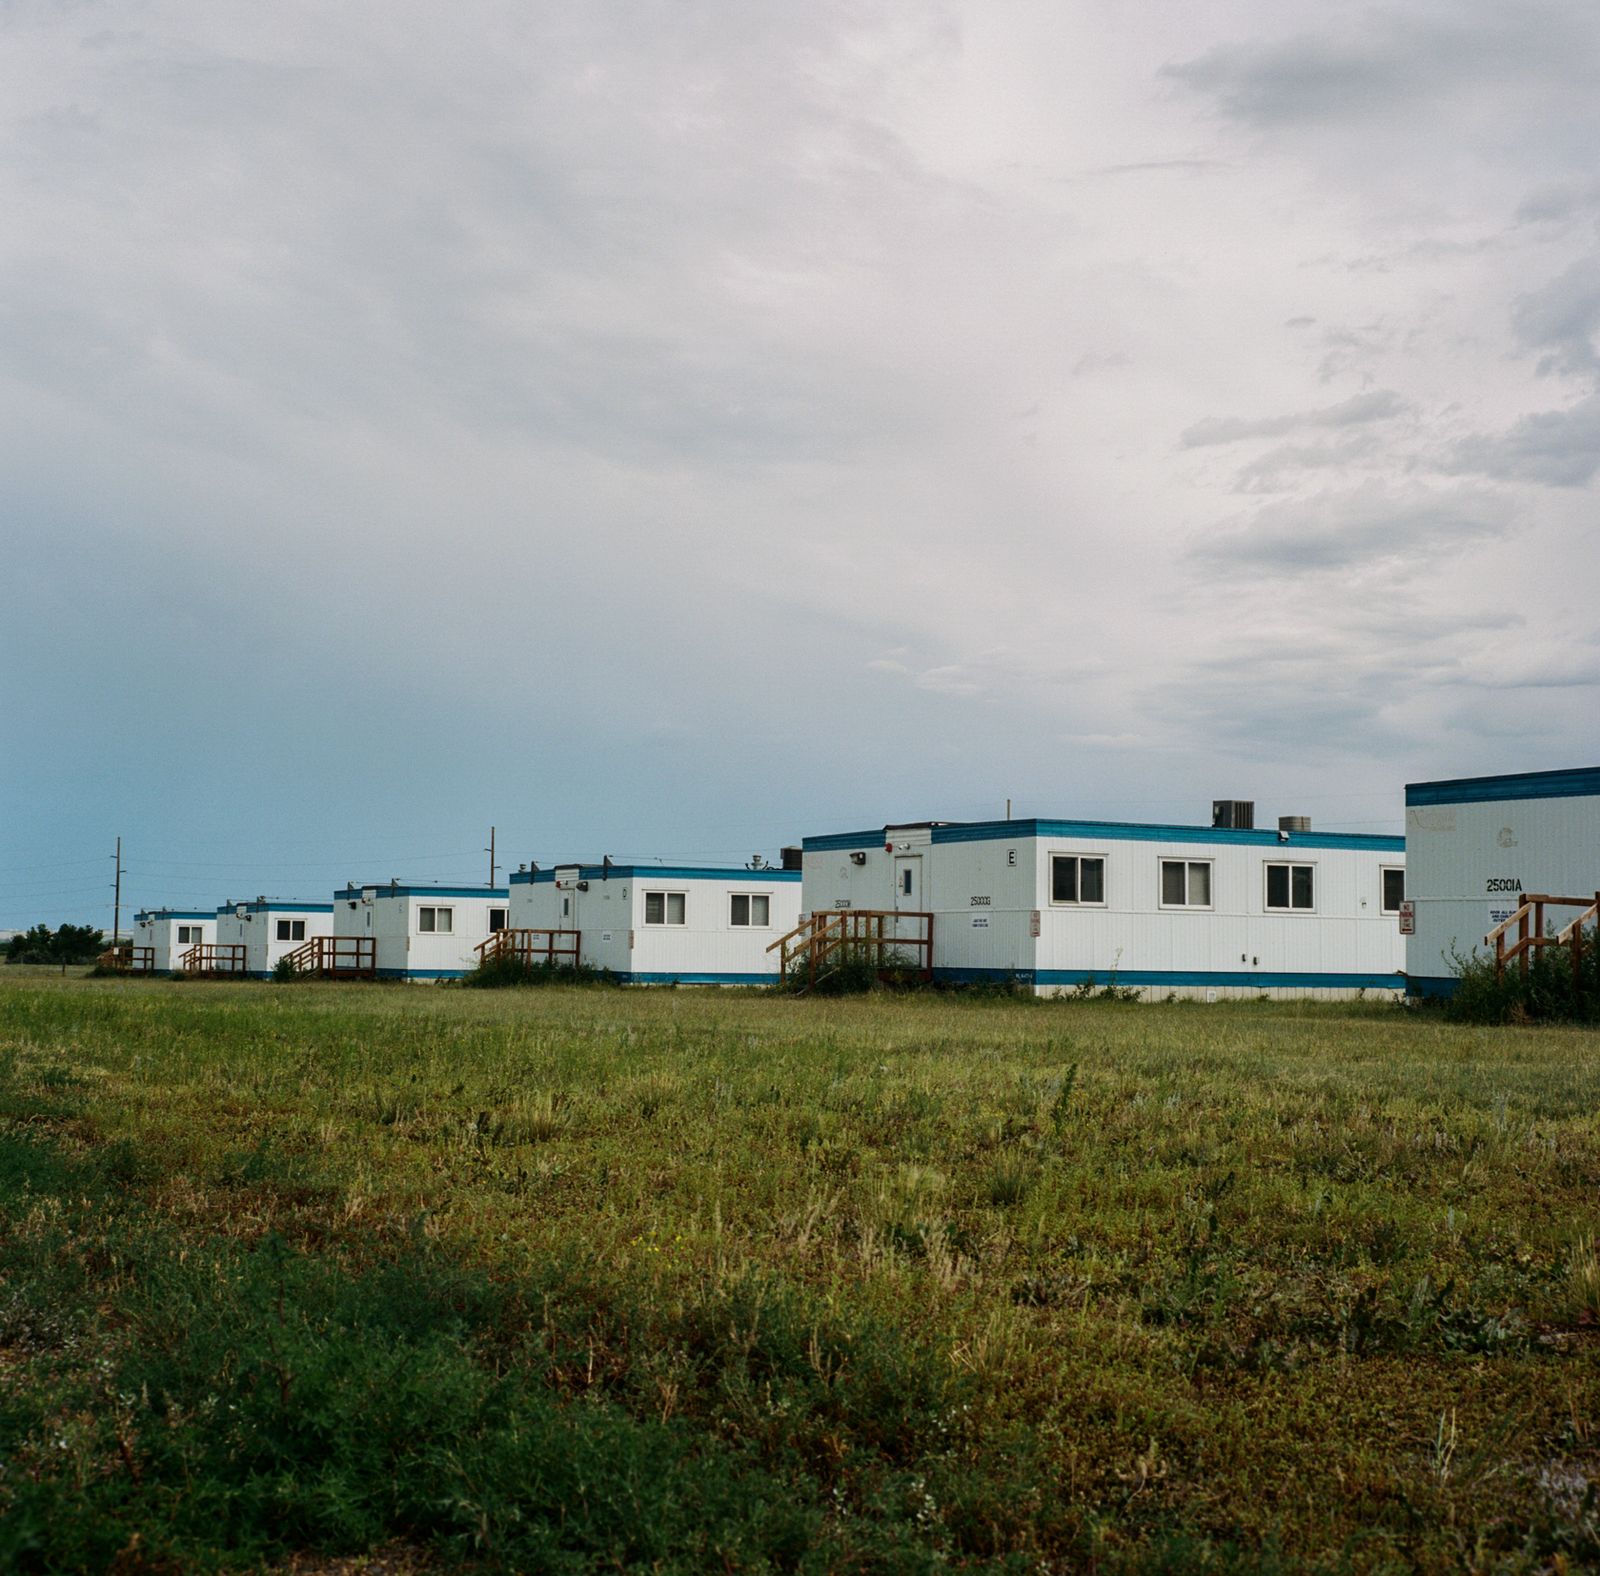 © Sara Hylton - Image from the The True Cost of Big Oil in Indian Country photography project